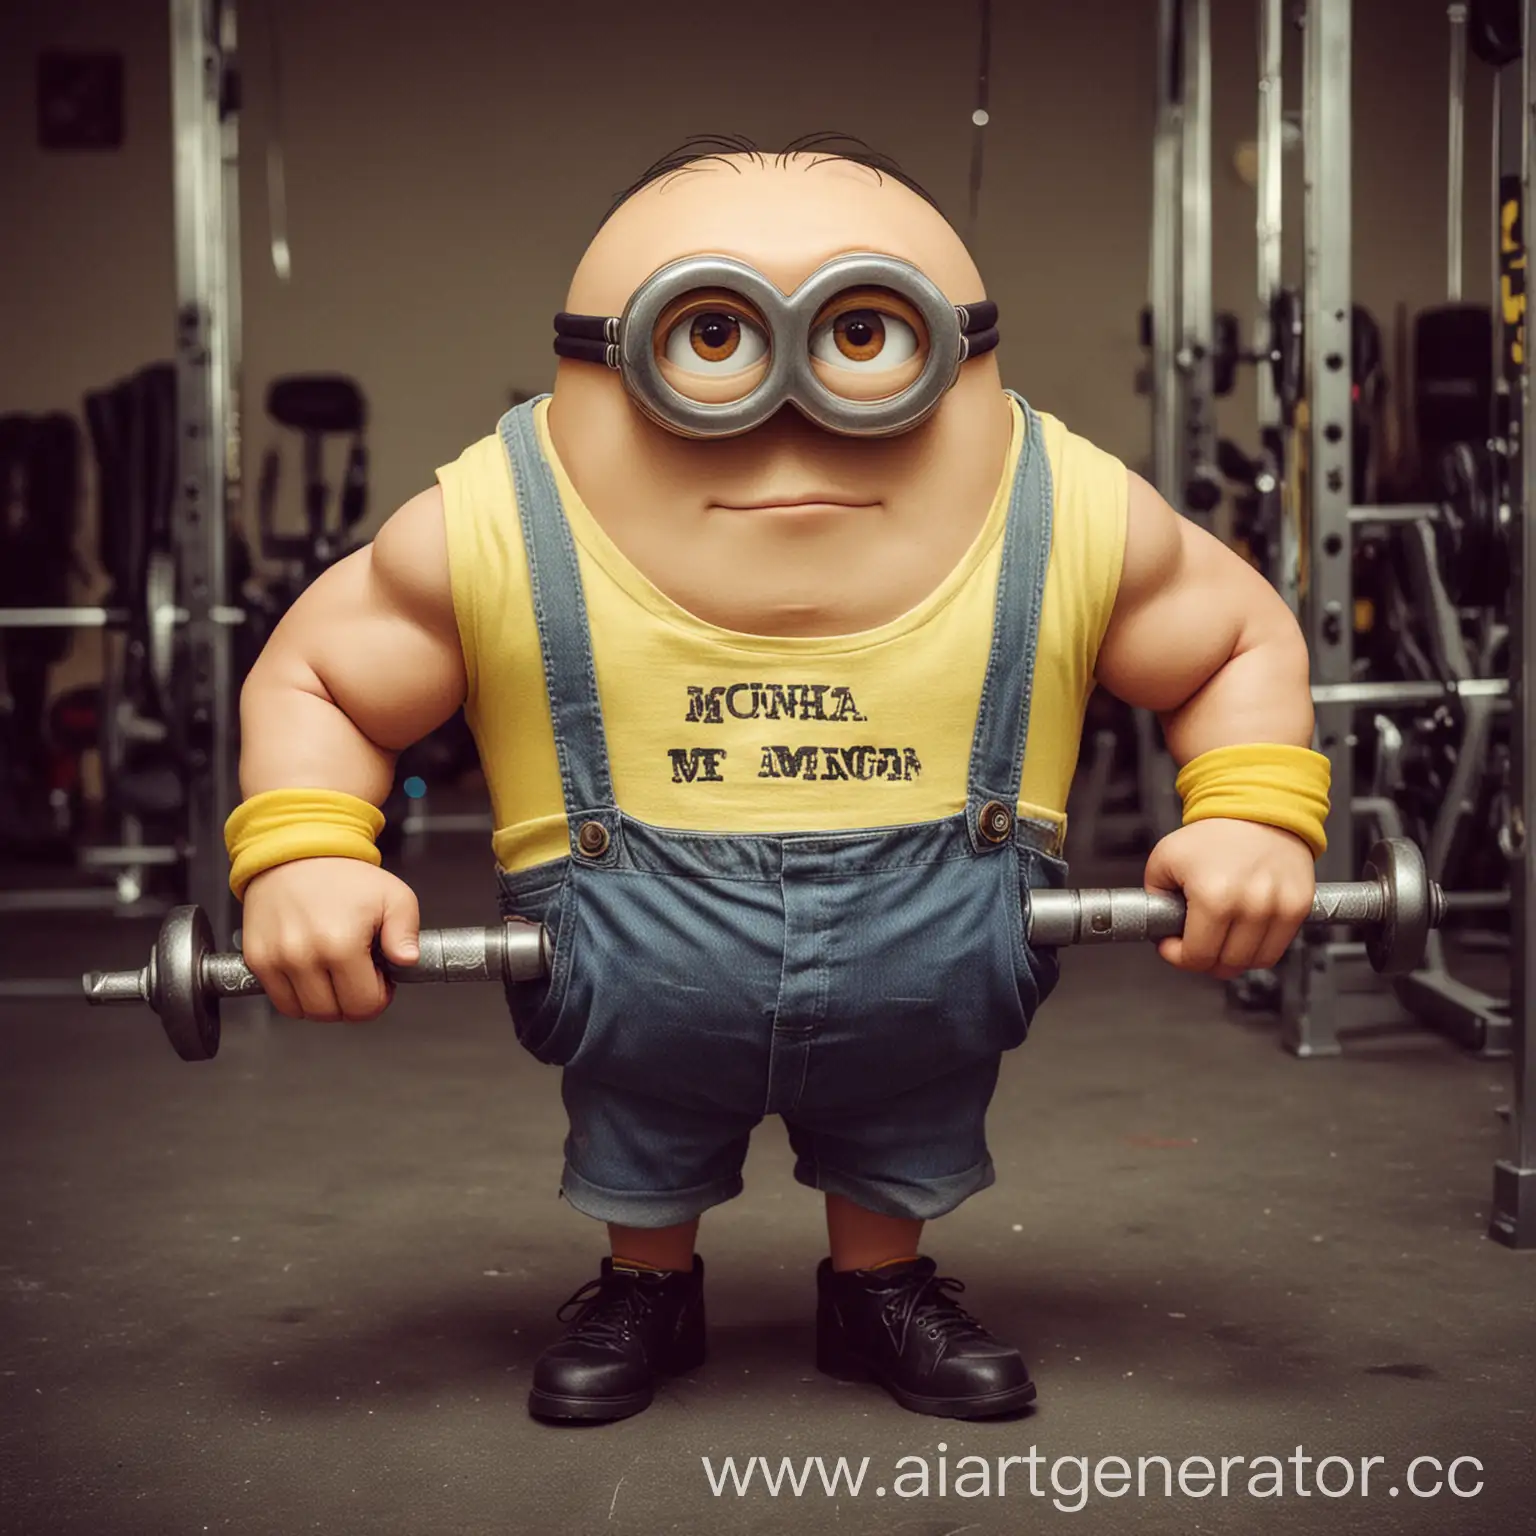 Muscular-Minion-Misha-Exercising-with-Expander-in-Gym